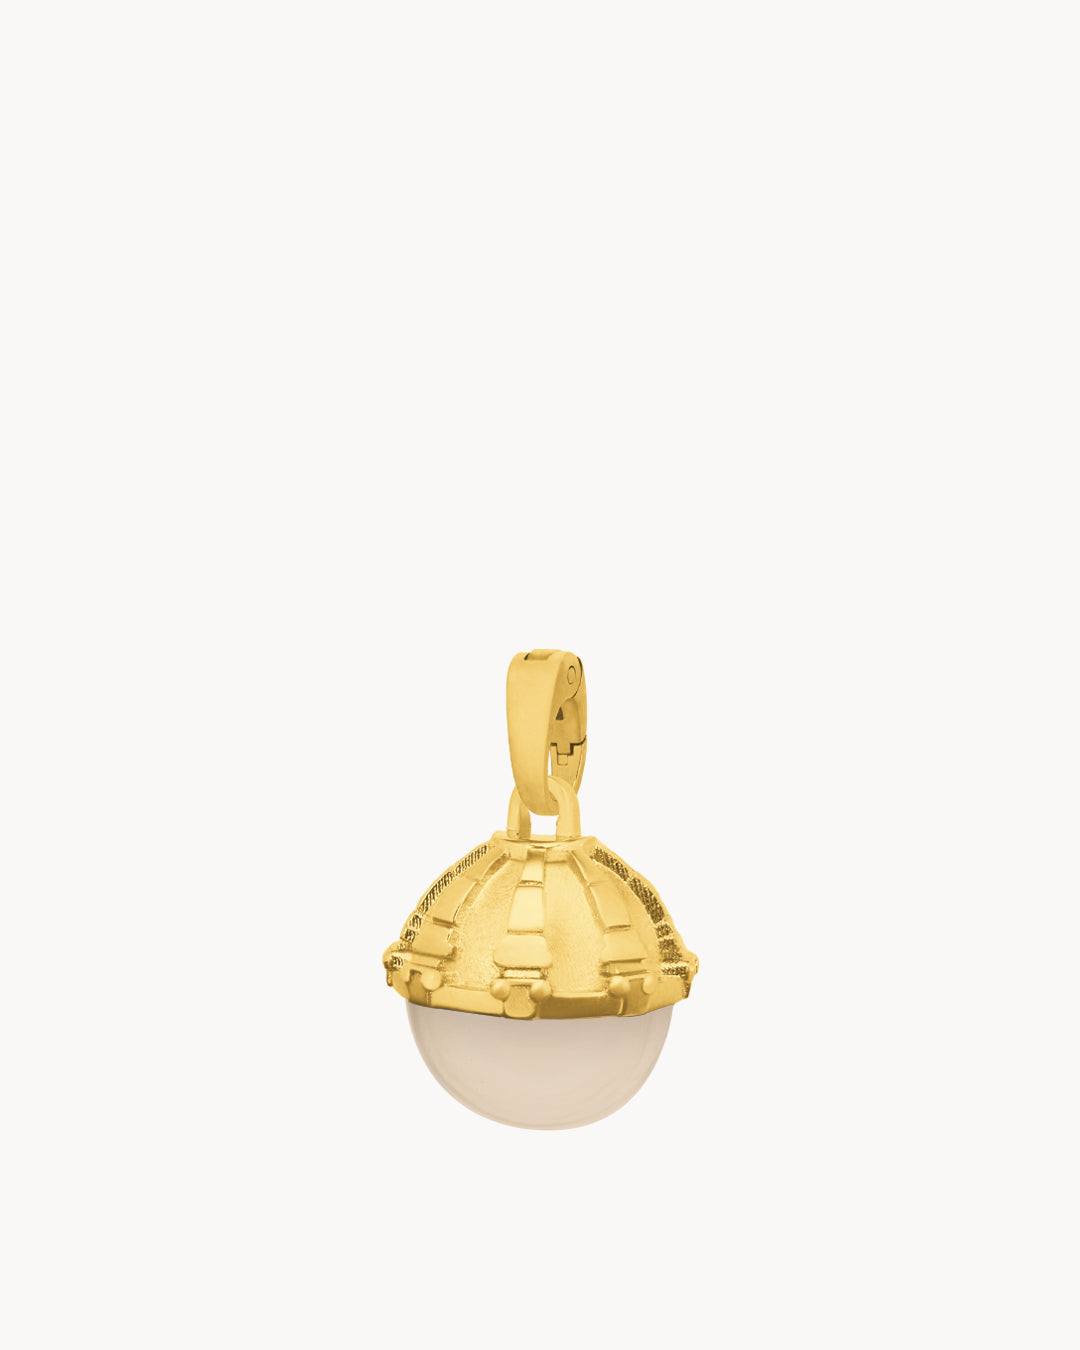 October Birthstone Dome Pendant, Gold